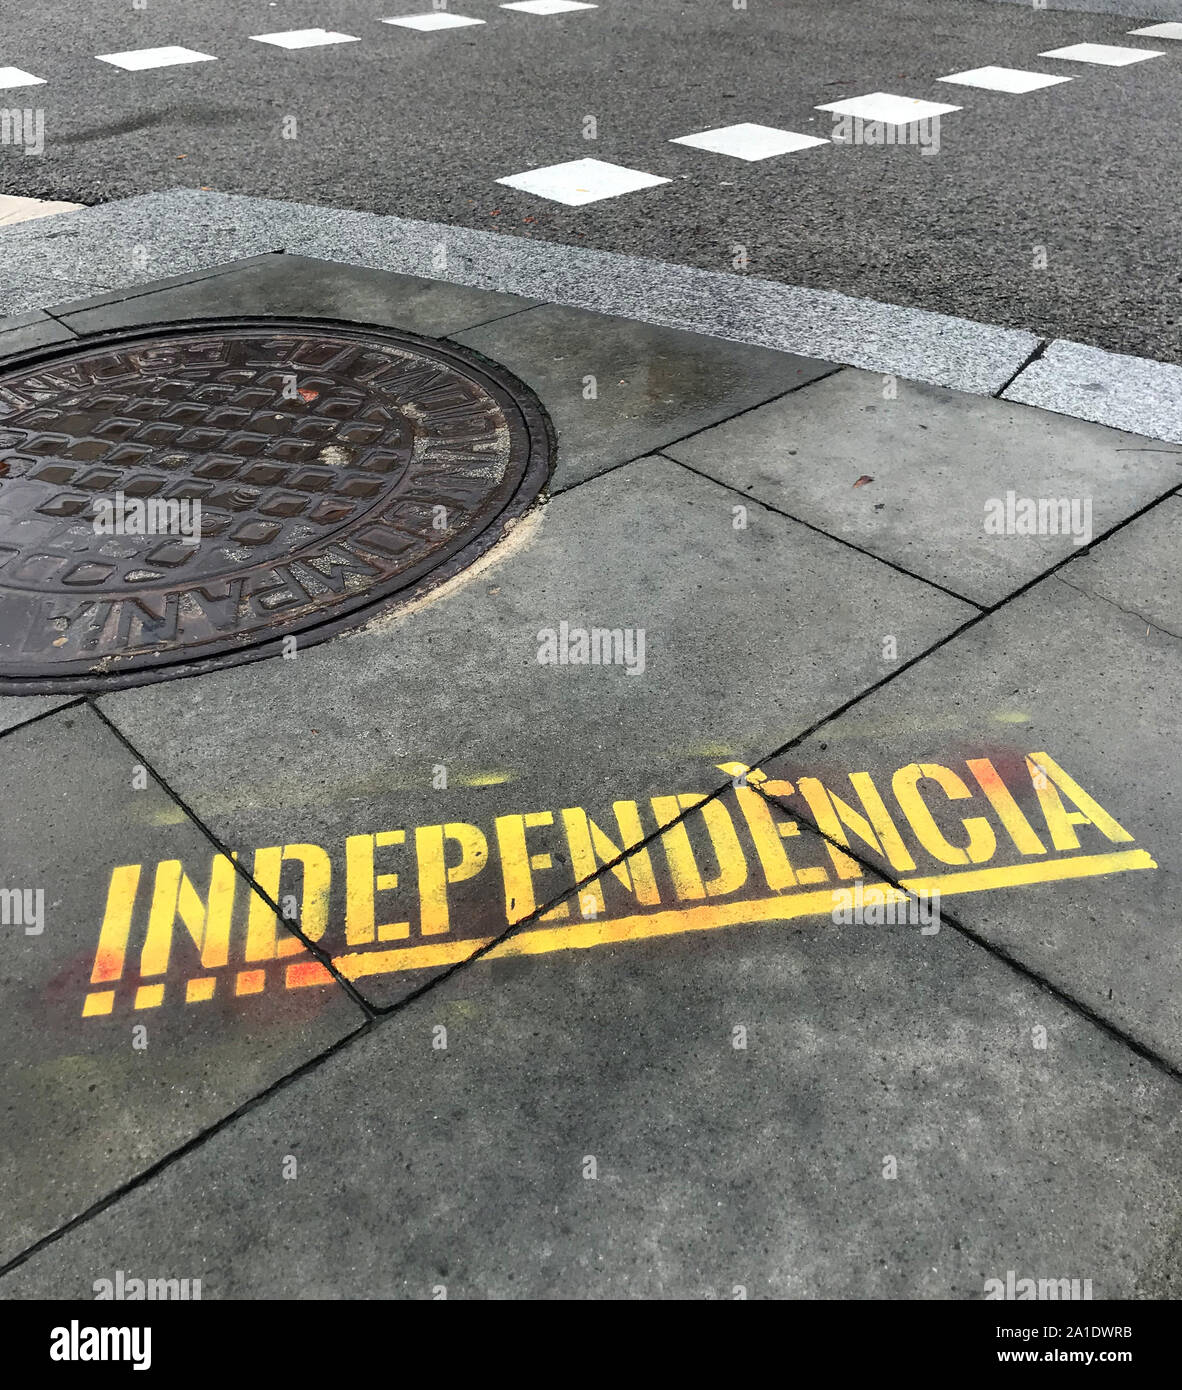 Barcelona, Spain - September 20, 2019: Graffiti of the Catalan independence movement on a street in Barcelona. Stock Photo